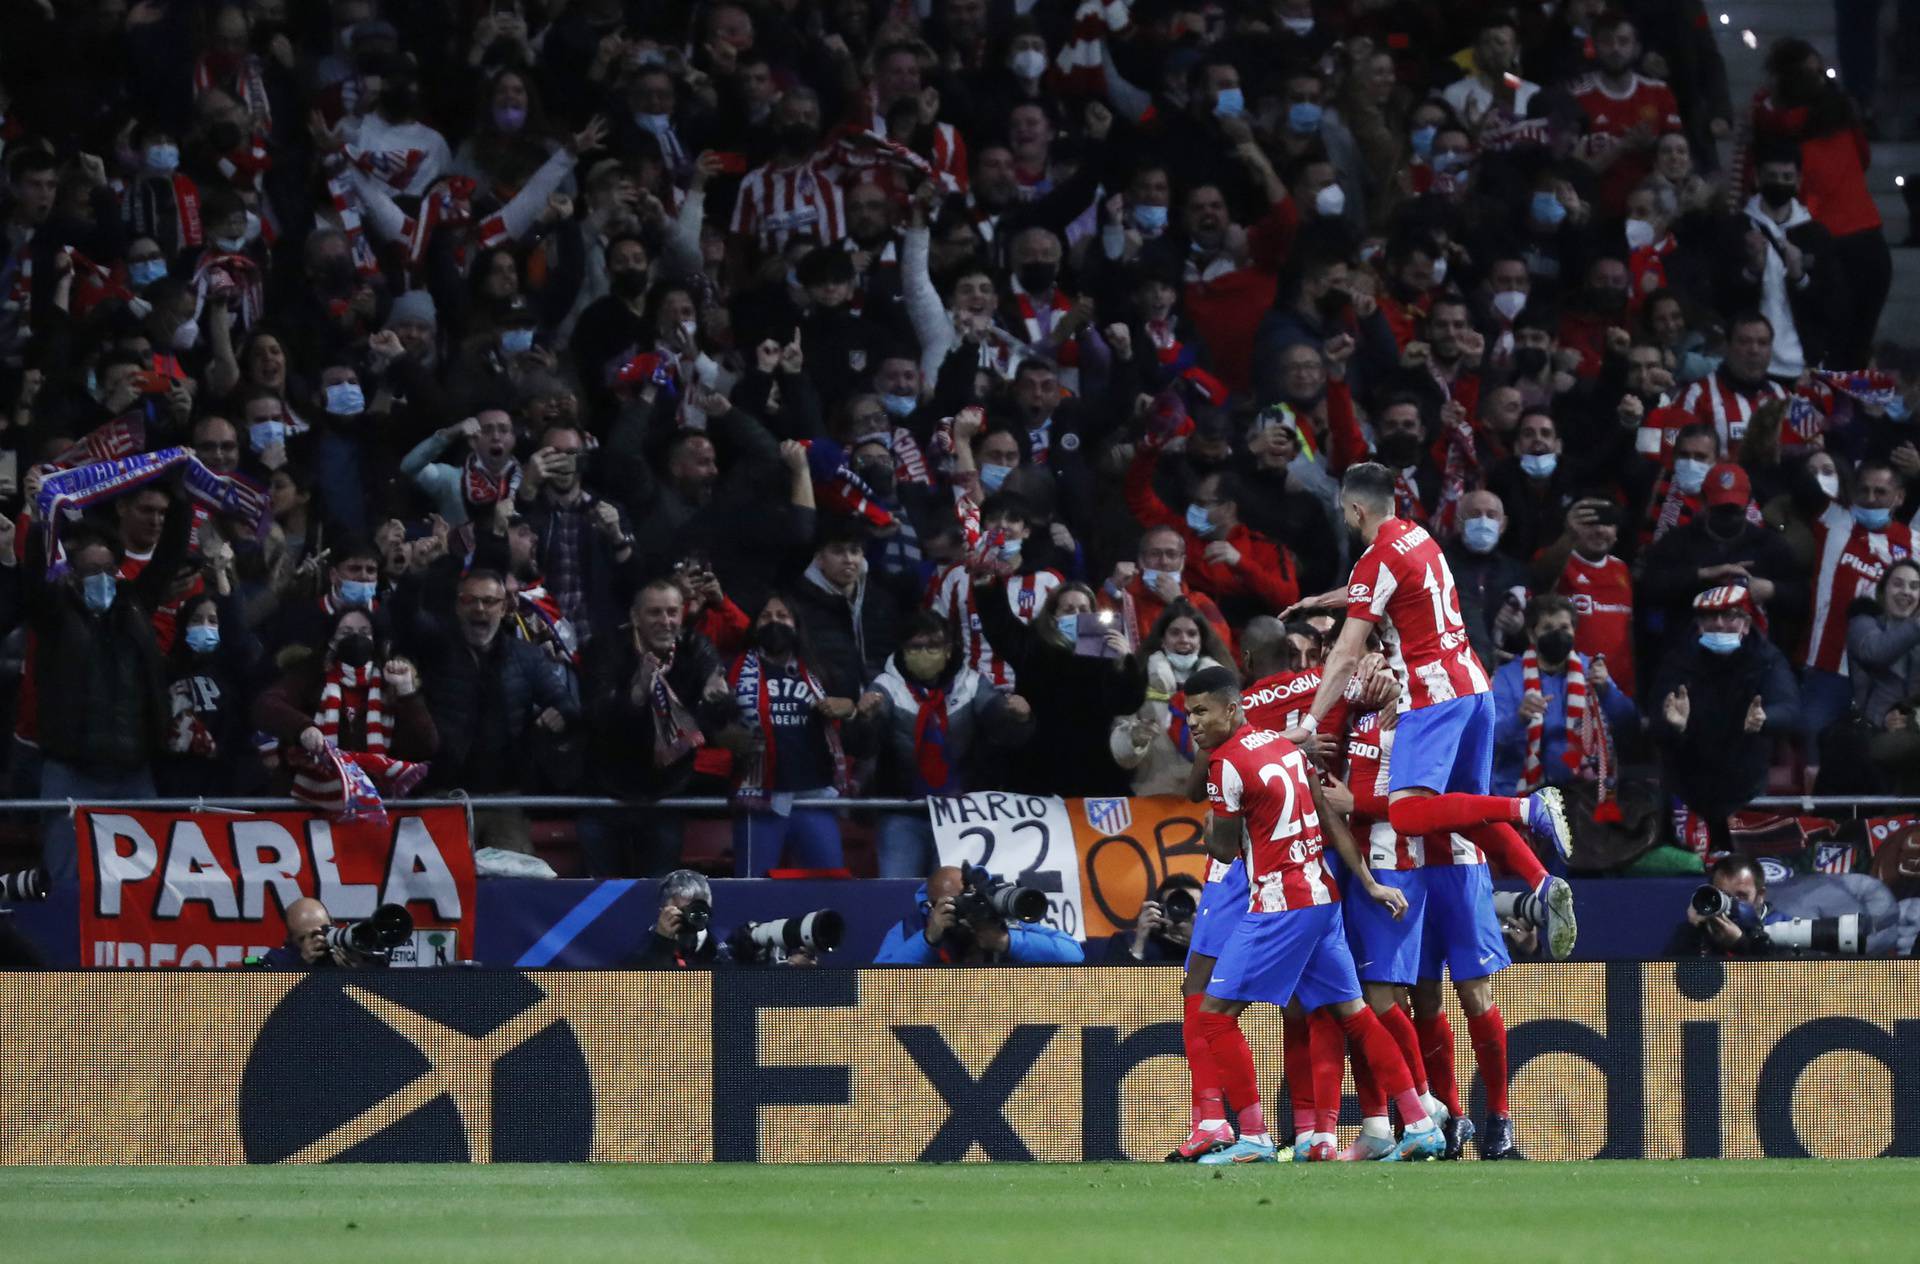 Champions League - Round of 16 First Leg - Atletico Madrid v Manchester United